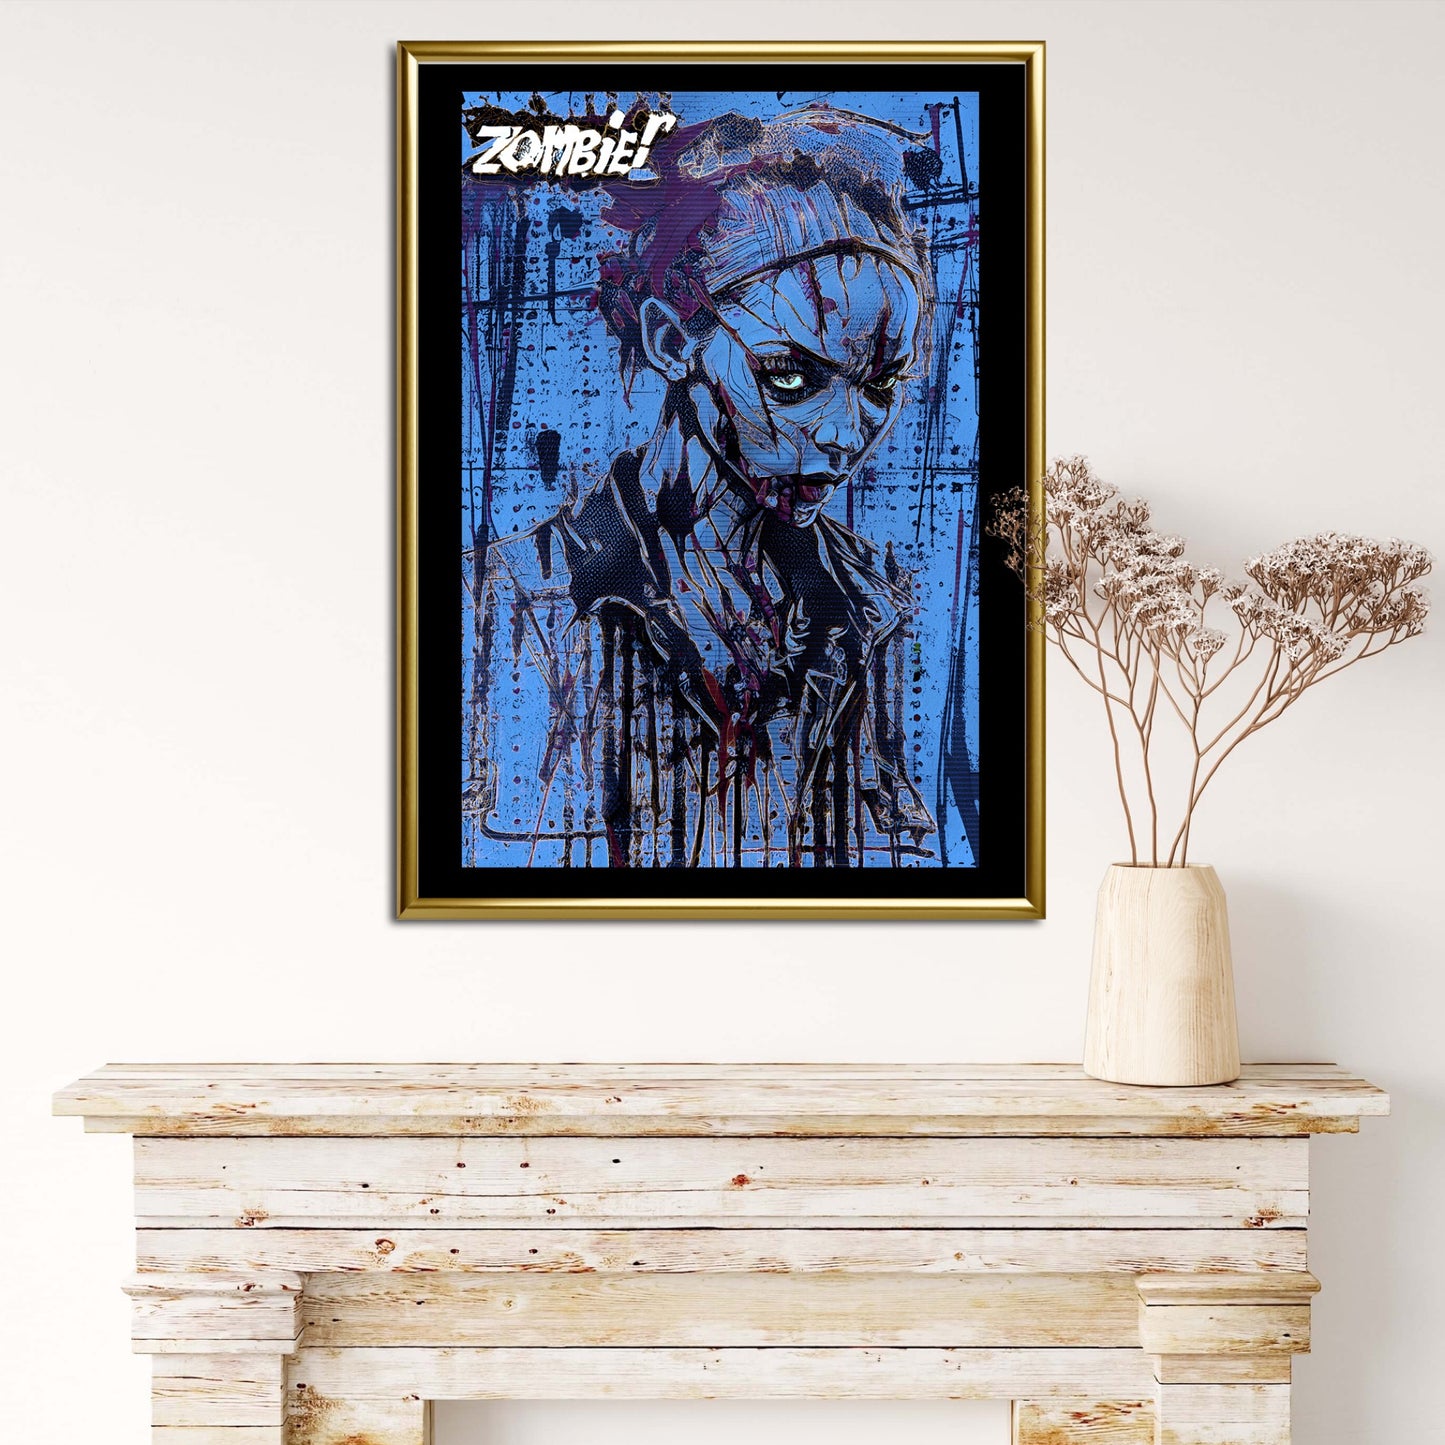 Zombie girl artwork with deep navy and icy blue colors, accented with luminous golden pen lines